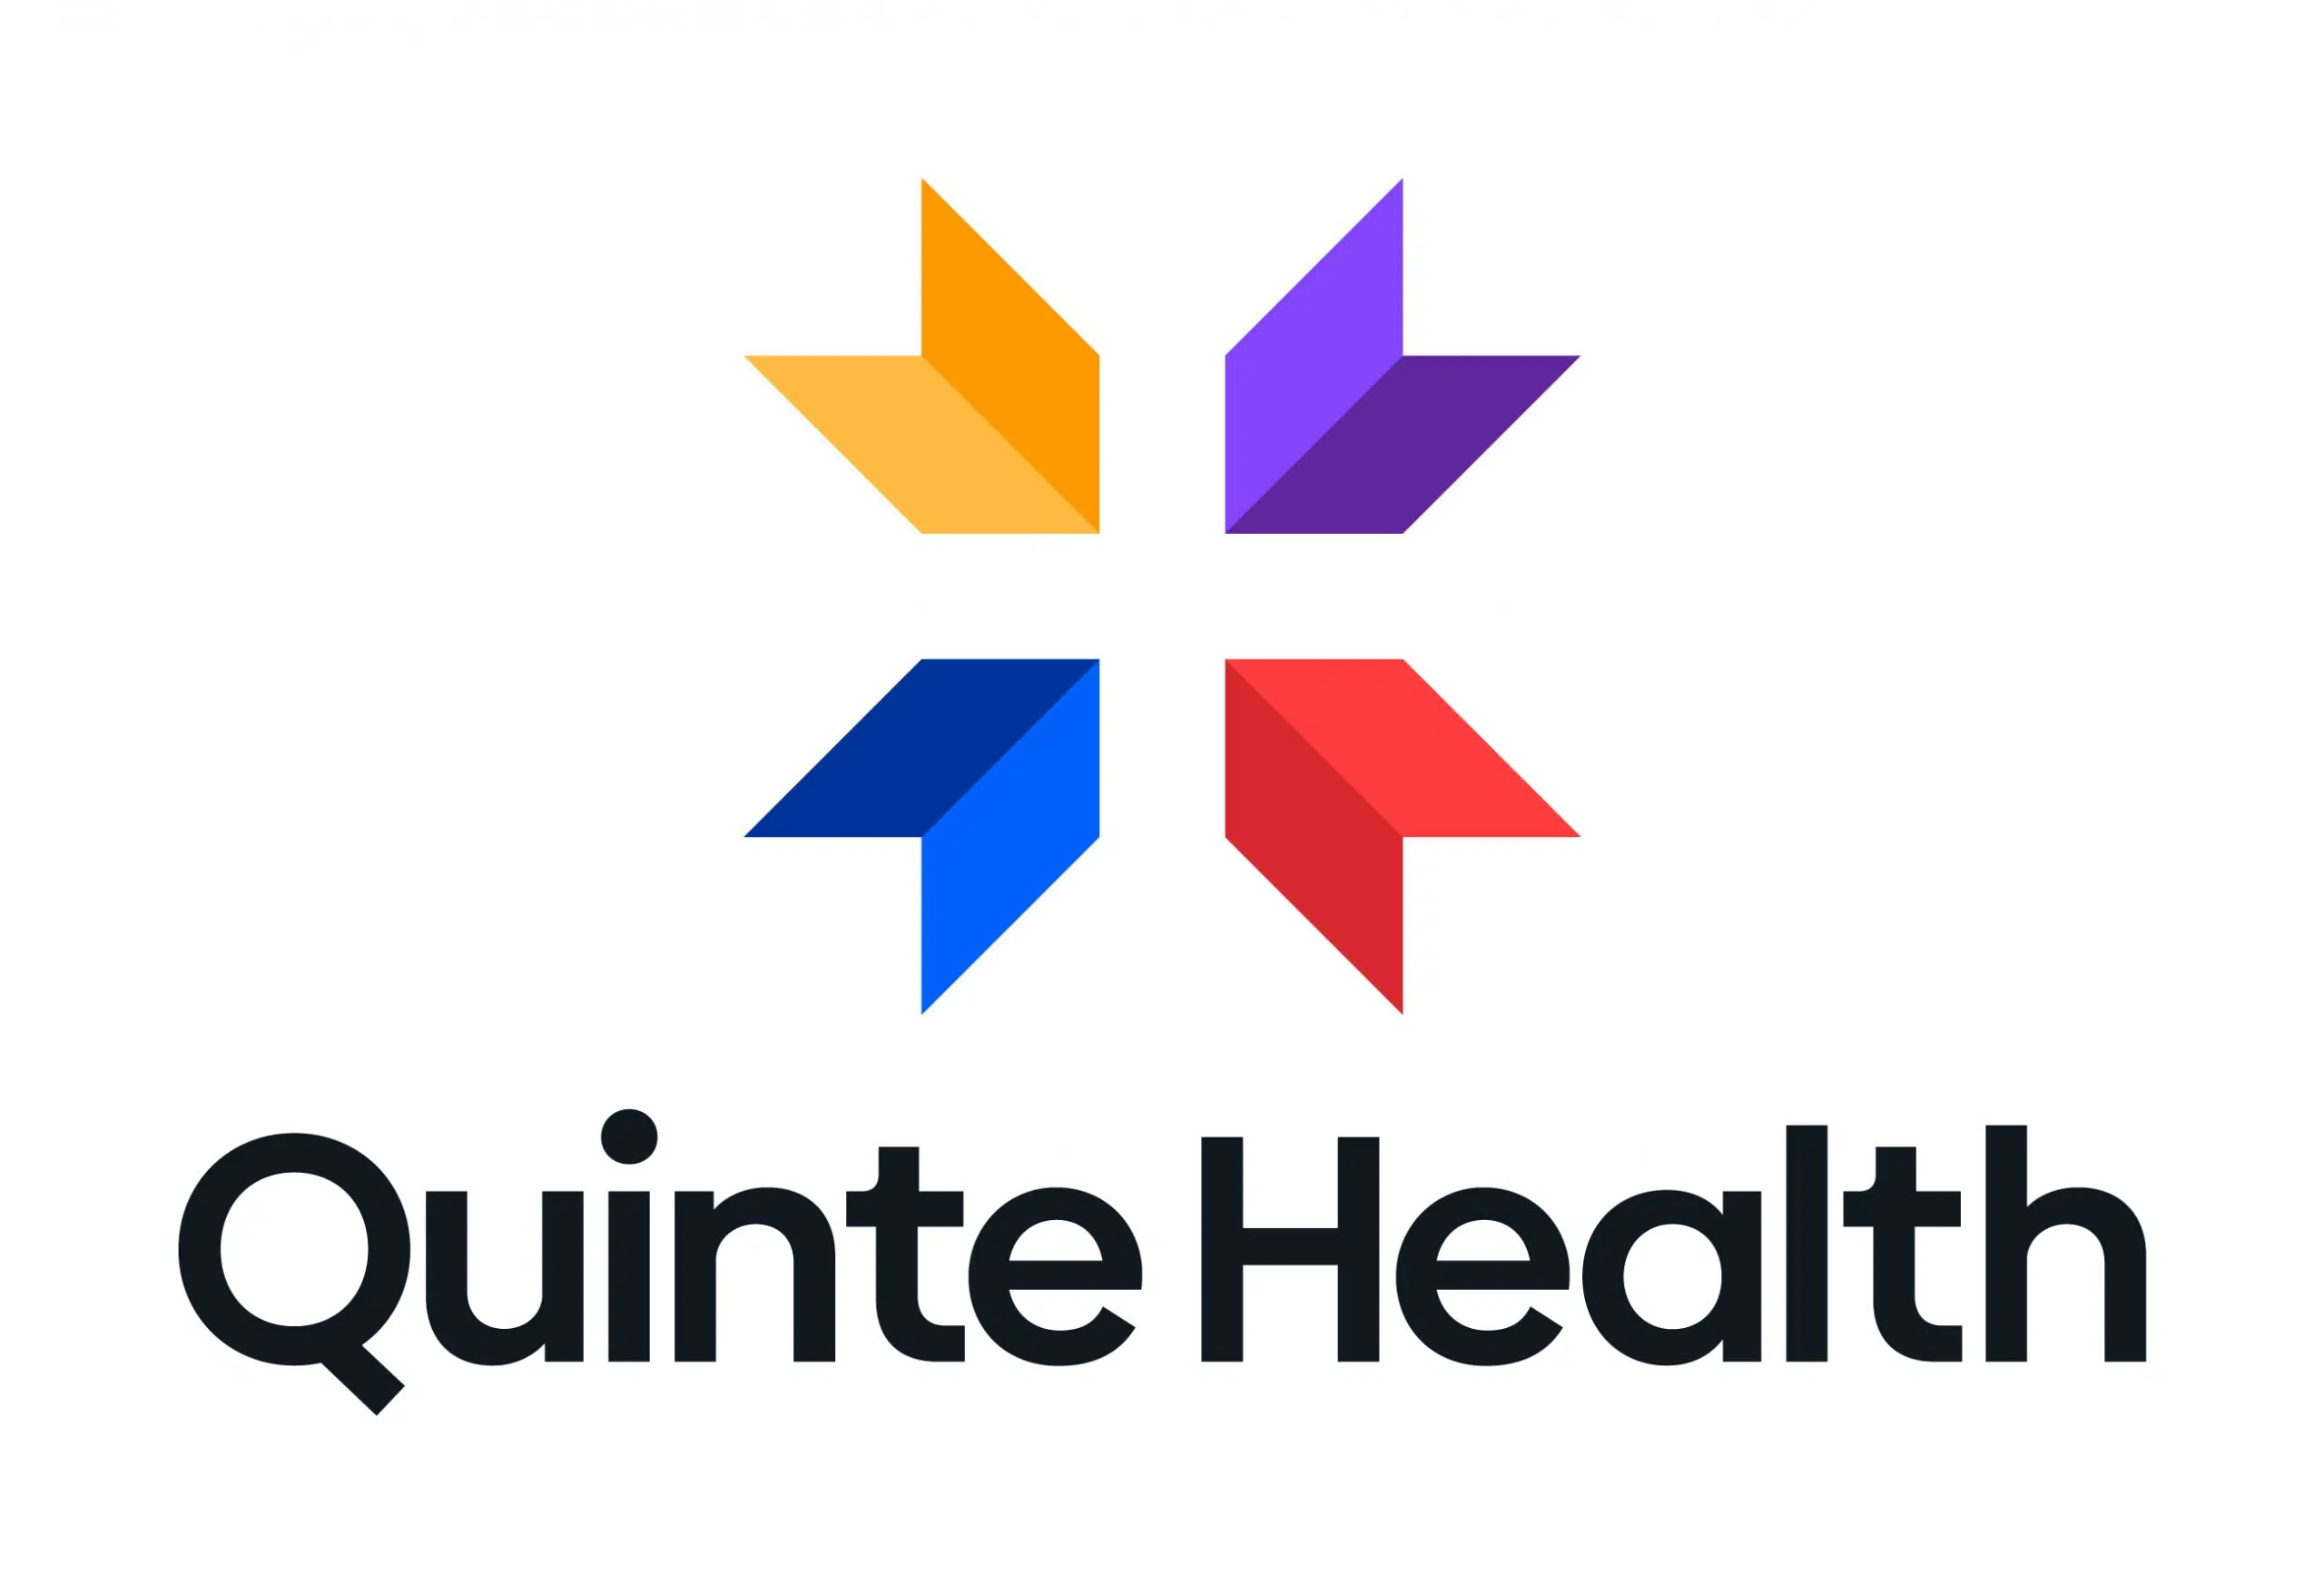 New name and logo for Quinte Health Care